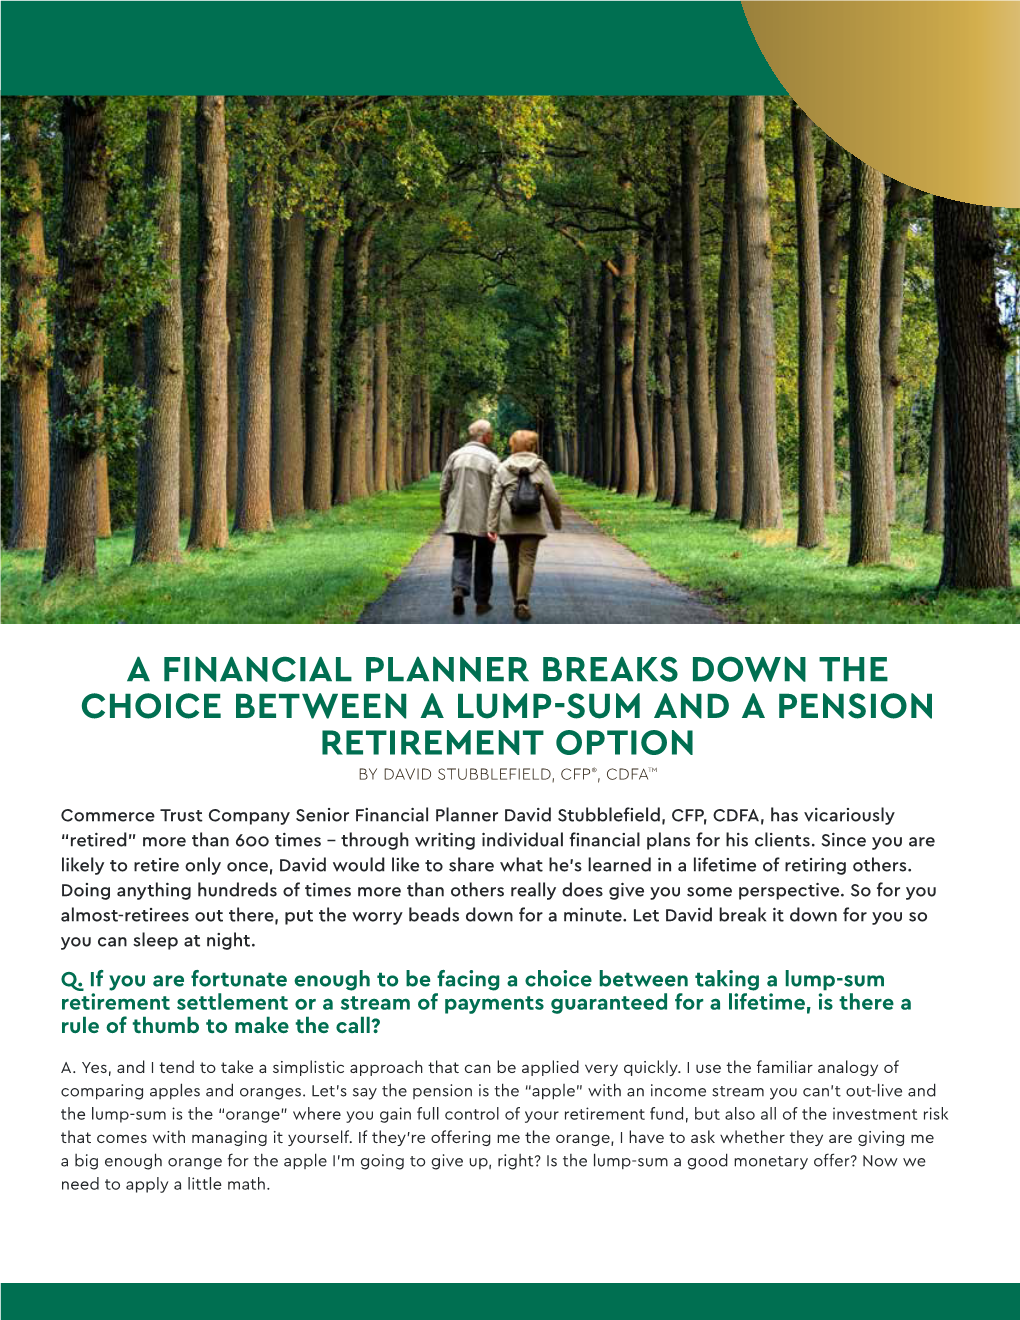 A Financial Planner Breaks Down the Choice Between a Lump-Sum and a Pension Retirement Option by David Stubblefield, Cfp®, Cdfa™